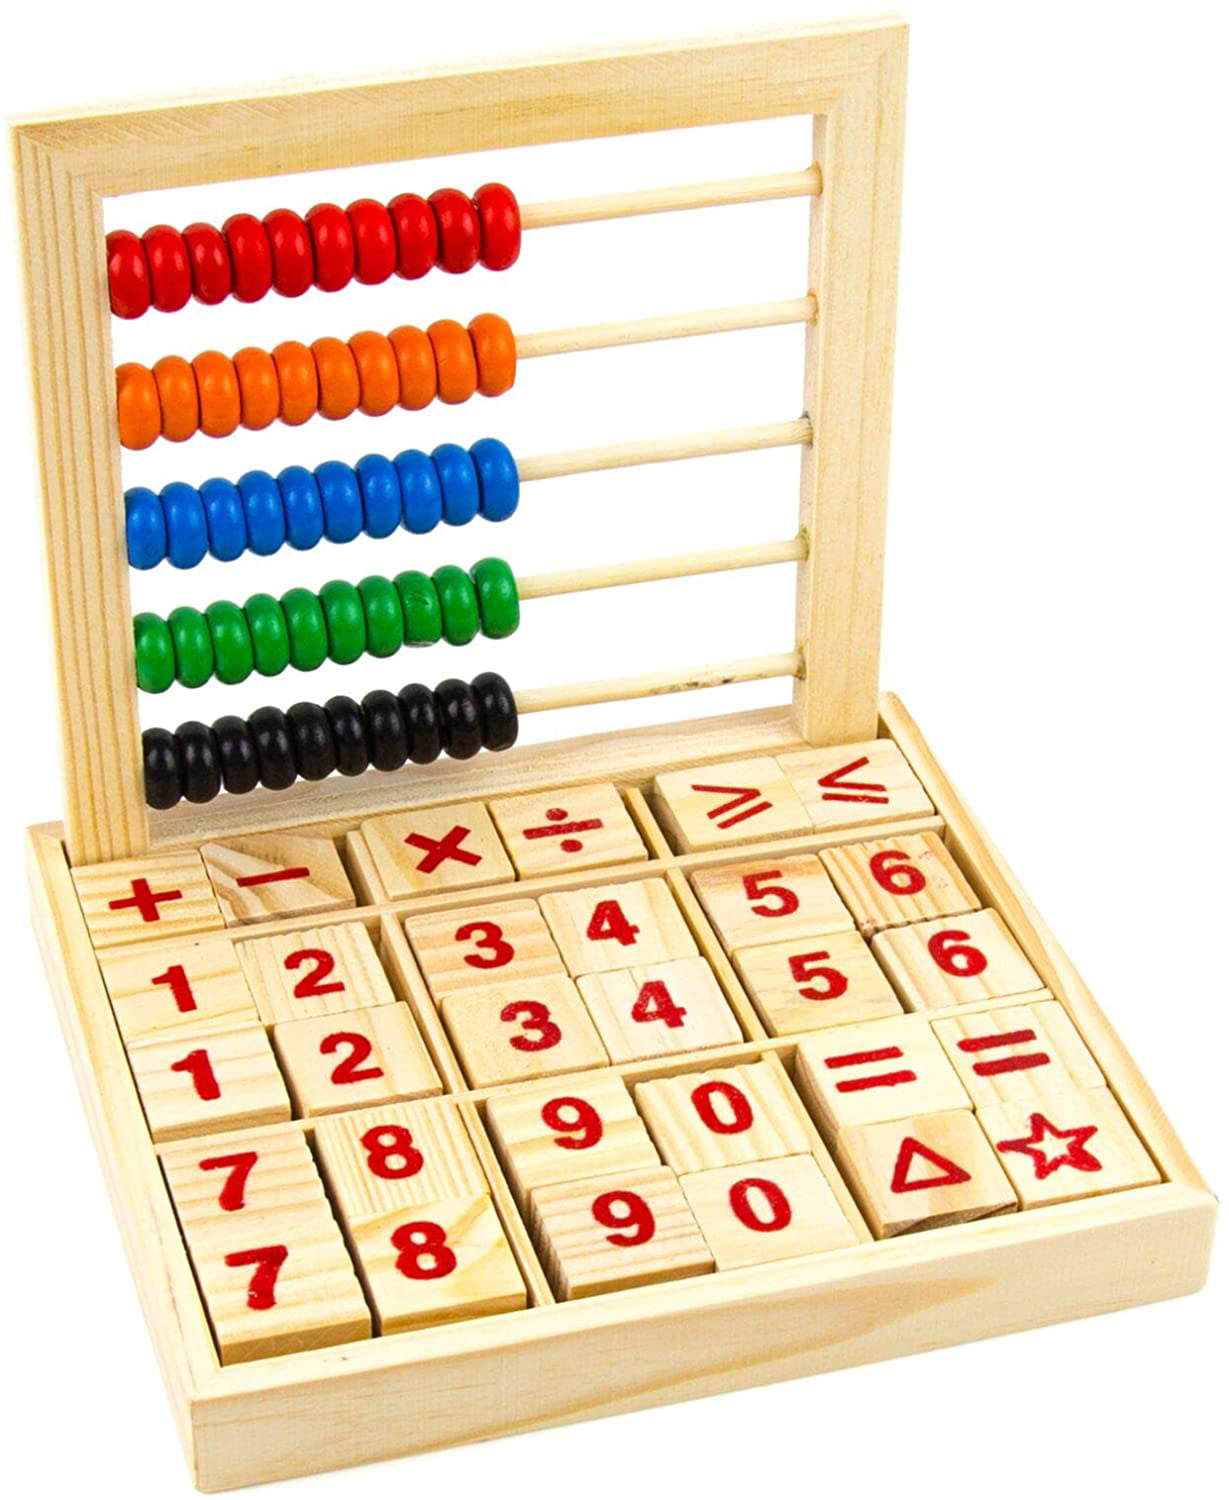 50 Beads and 30 Block Promote Learning Calculations Abacus Study Blocks Wood 